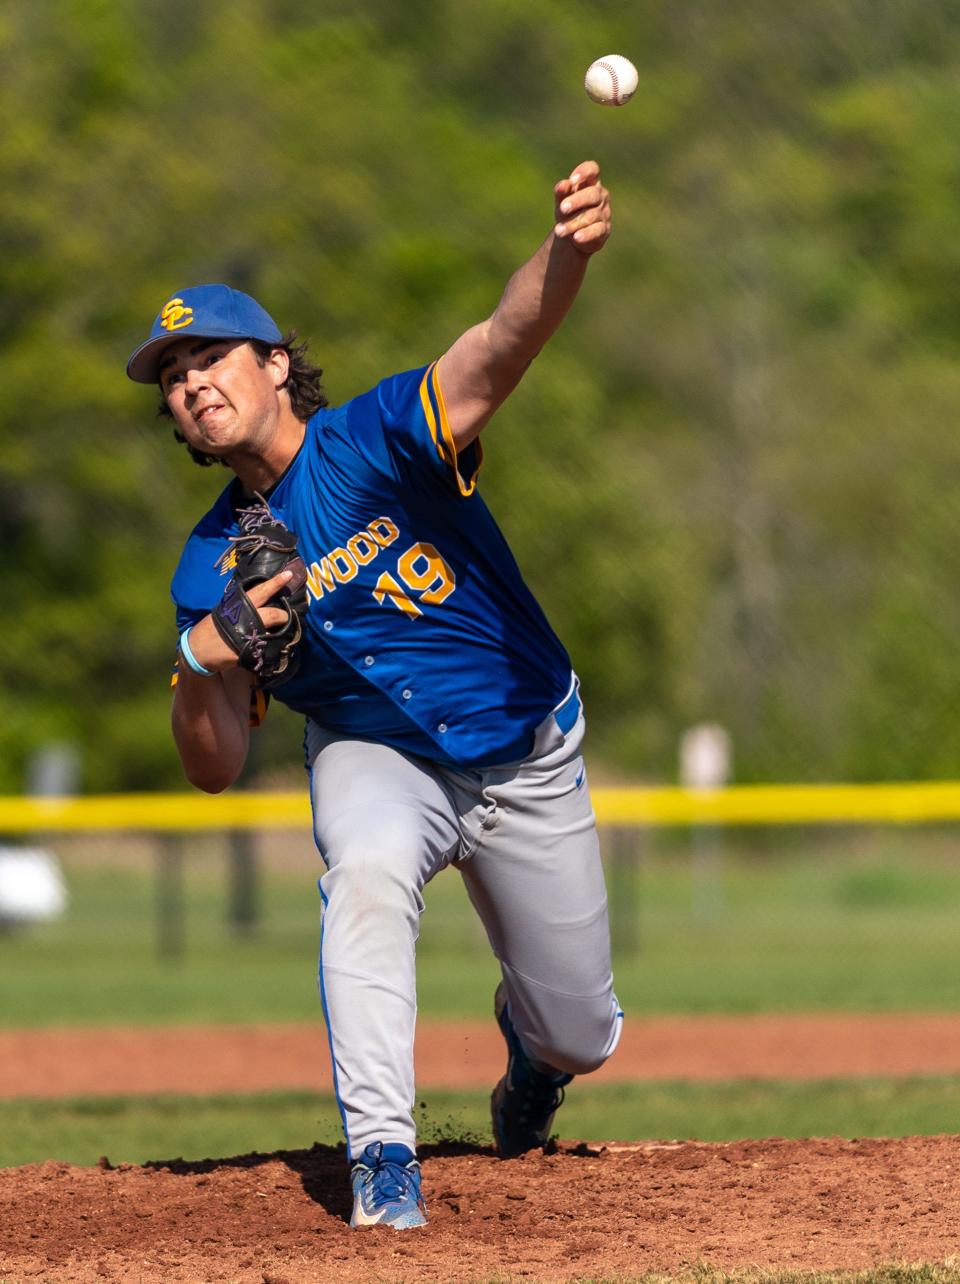 Spotswood's Carter Cumiskey (19) pitches the ball against St. Joseph on Wednesday, May 10, 2023 at the field at North Brunswick Community Park in North Brunswick.